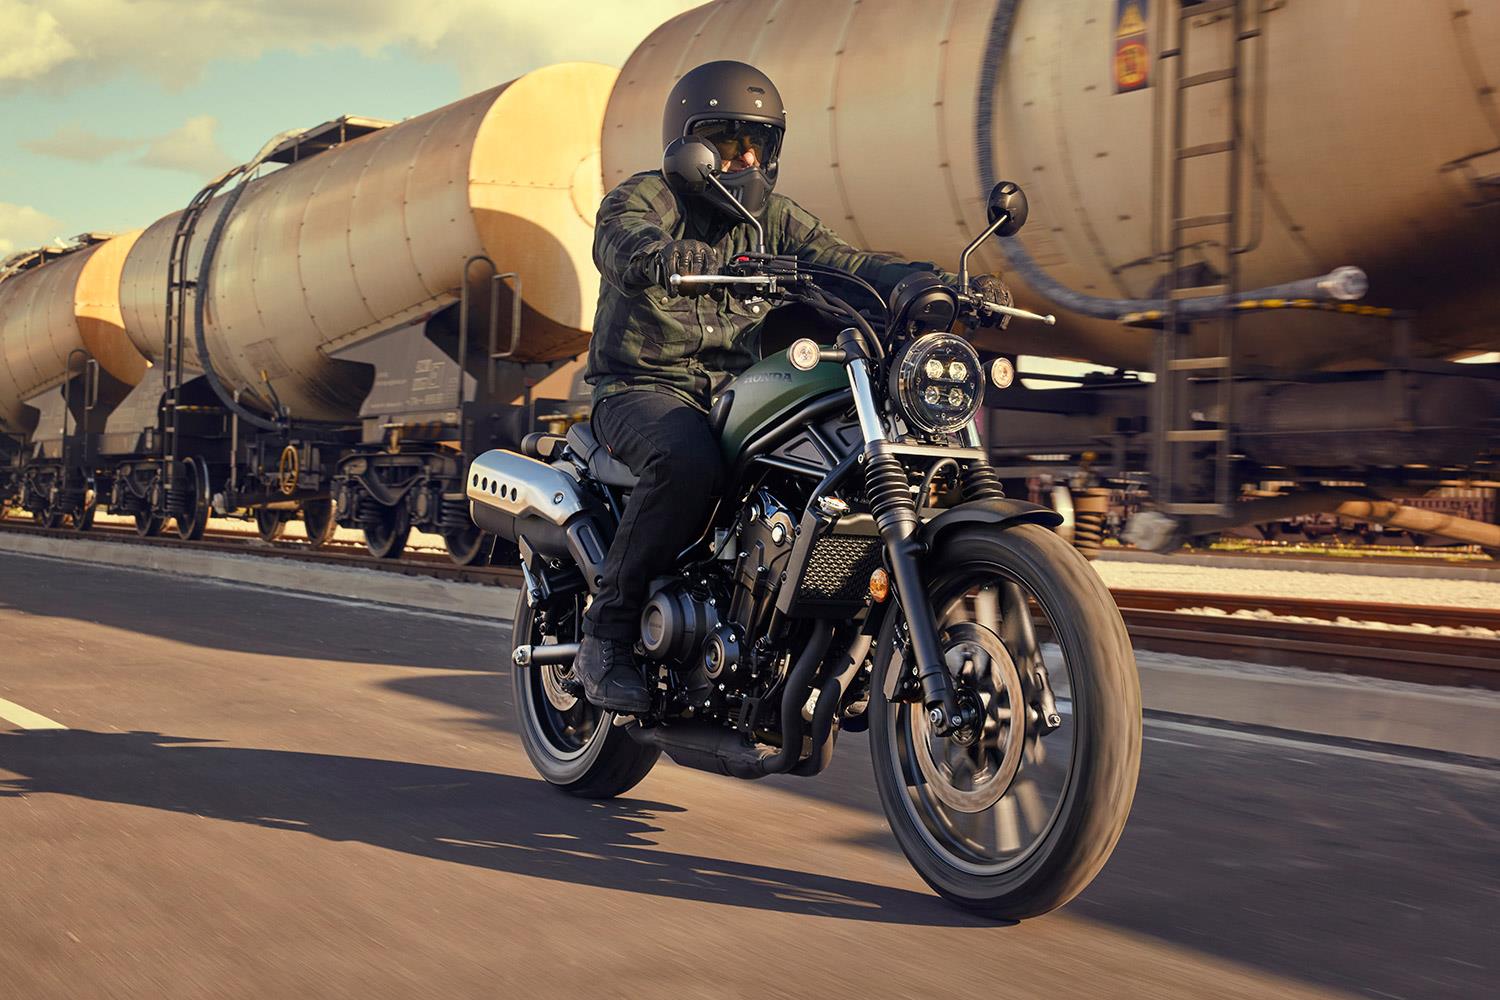 Cheap thrills: Honda's CL500 scrambler will arrive in April and cost £6k